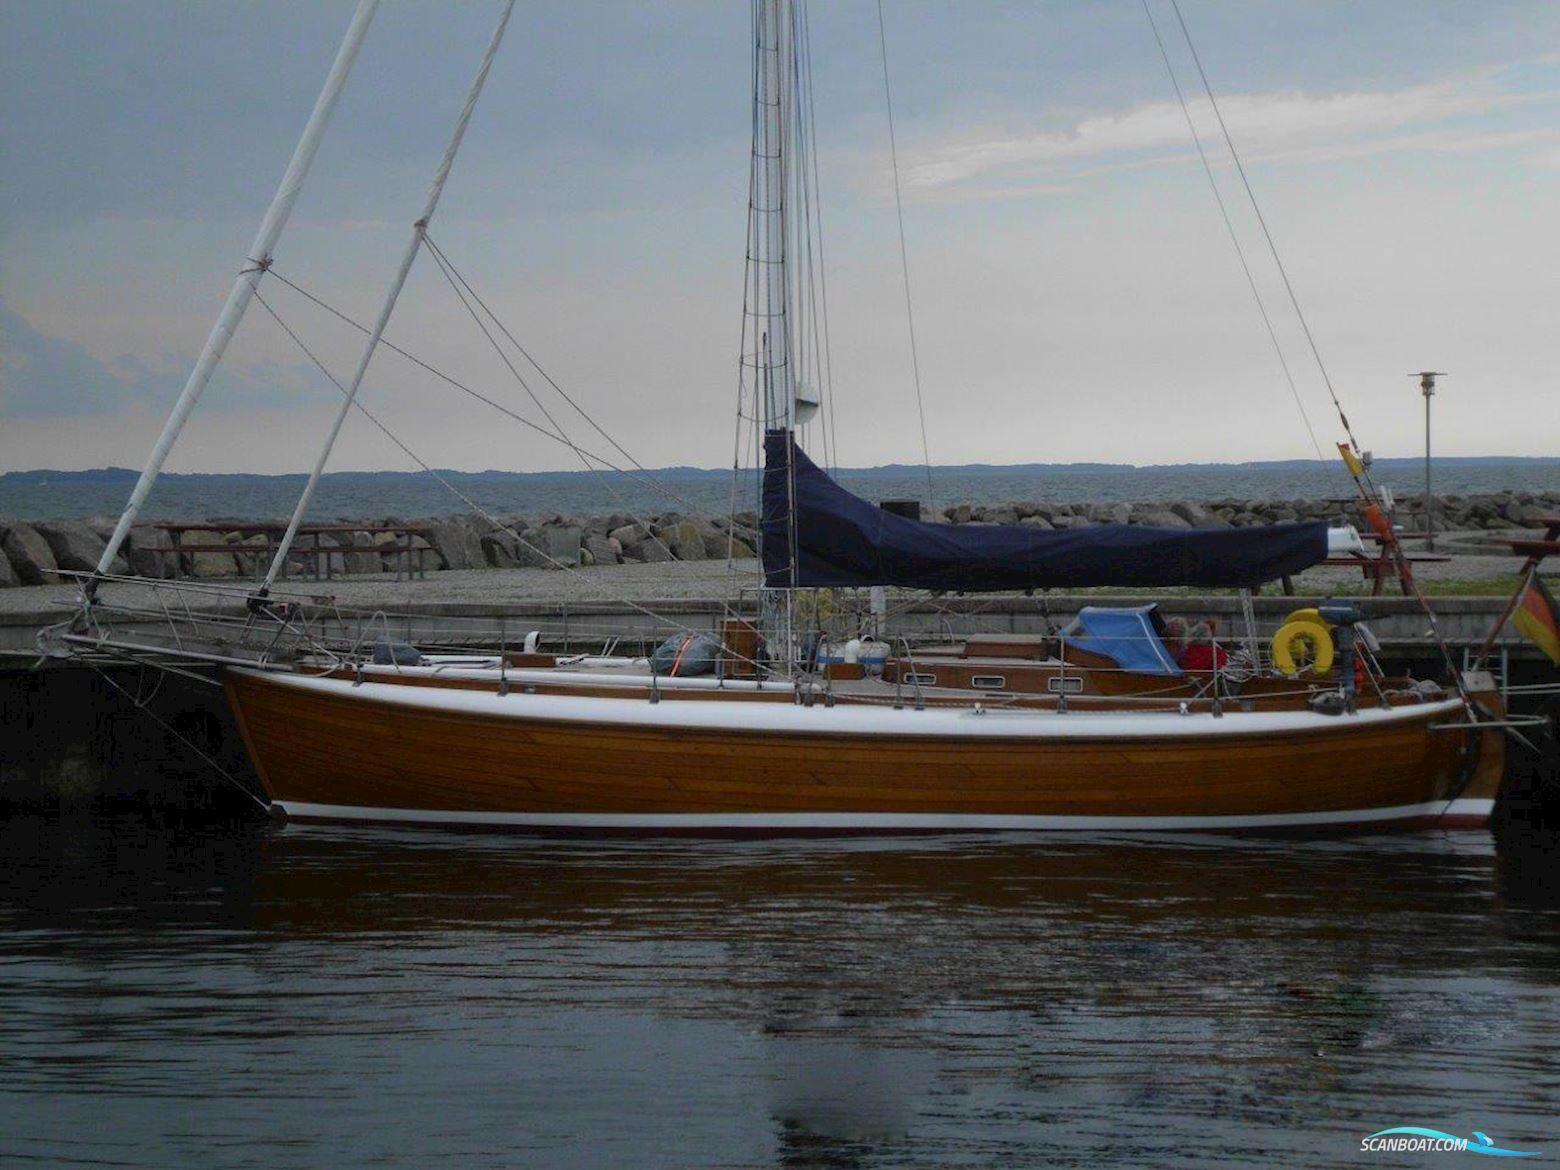 Laurin Koster 41 Sailing boat 1972, with VW Alpha Marine engine, Germany